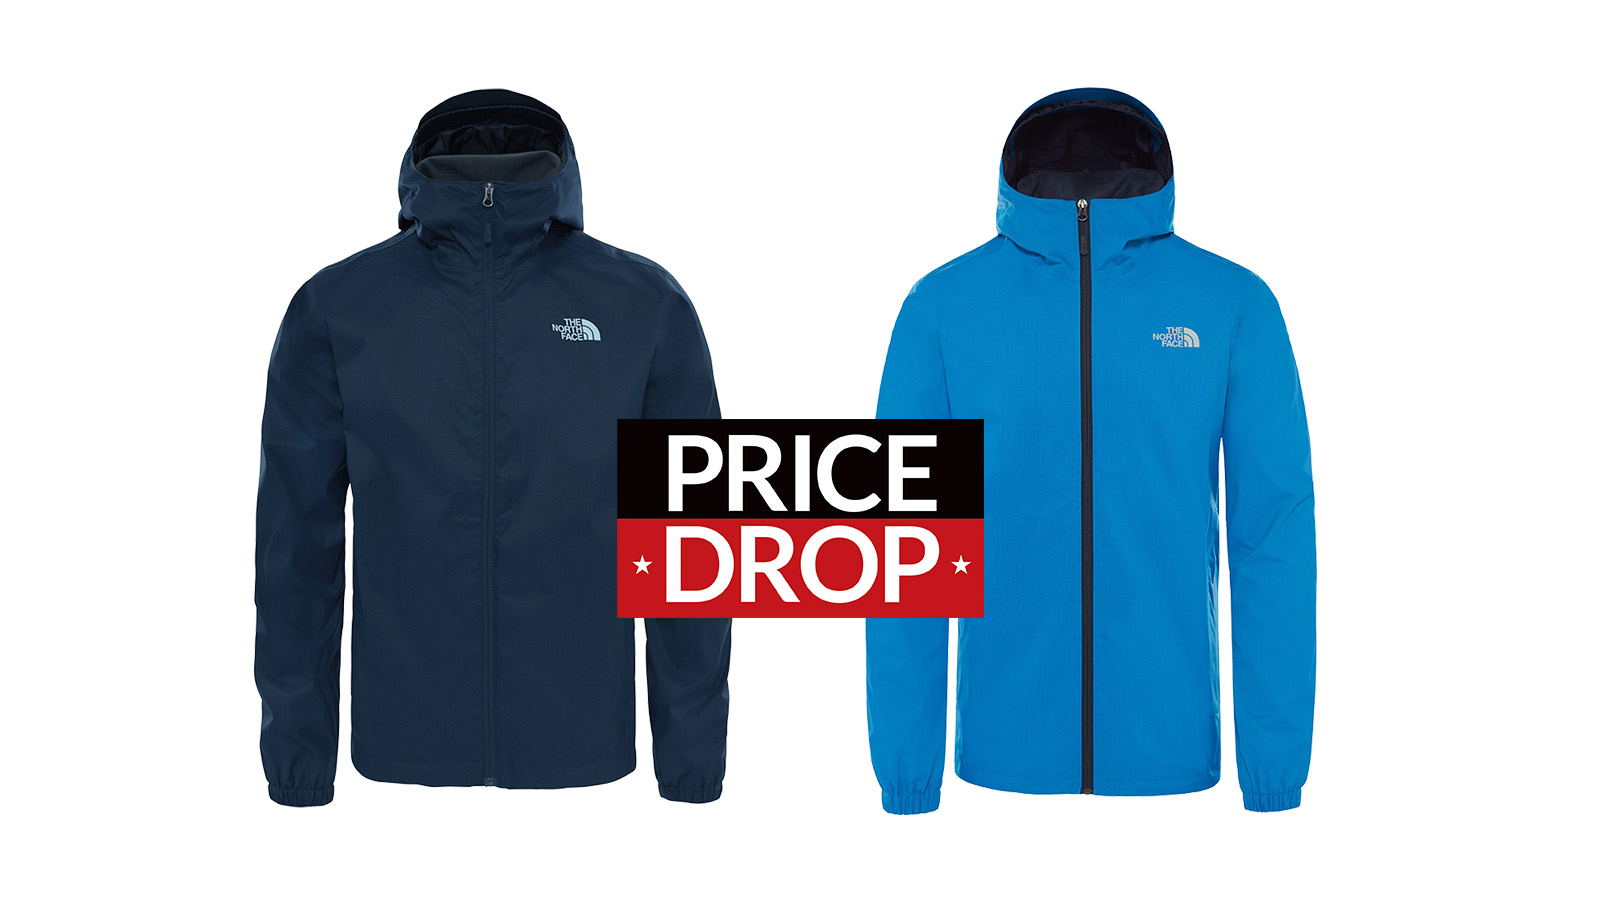 knoop wervelkolom Inademen The North Face jacket sale: up to 50% off select down and waterproof  jackets | T3